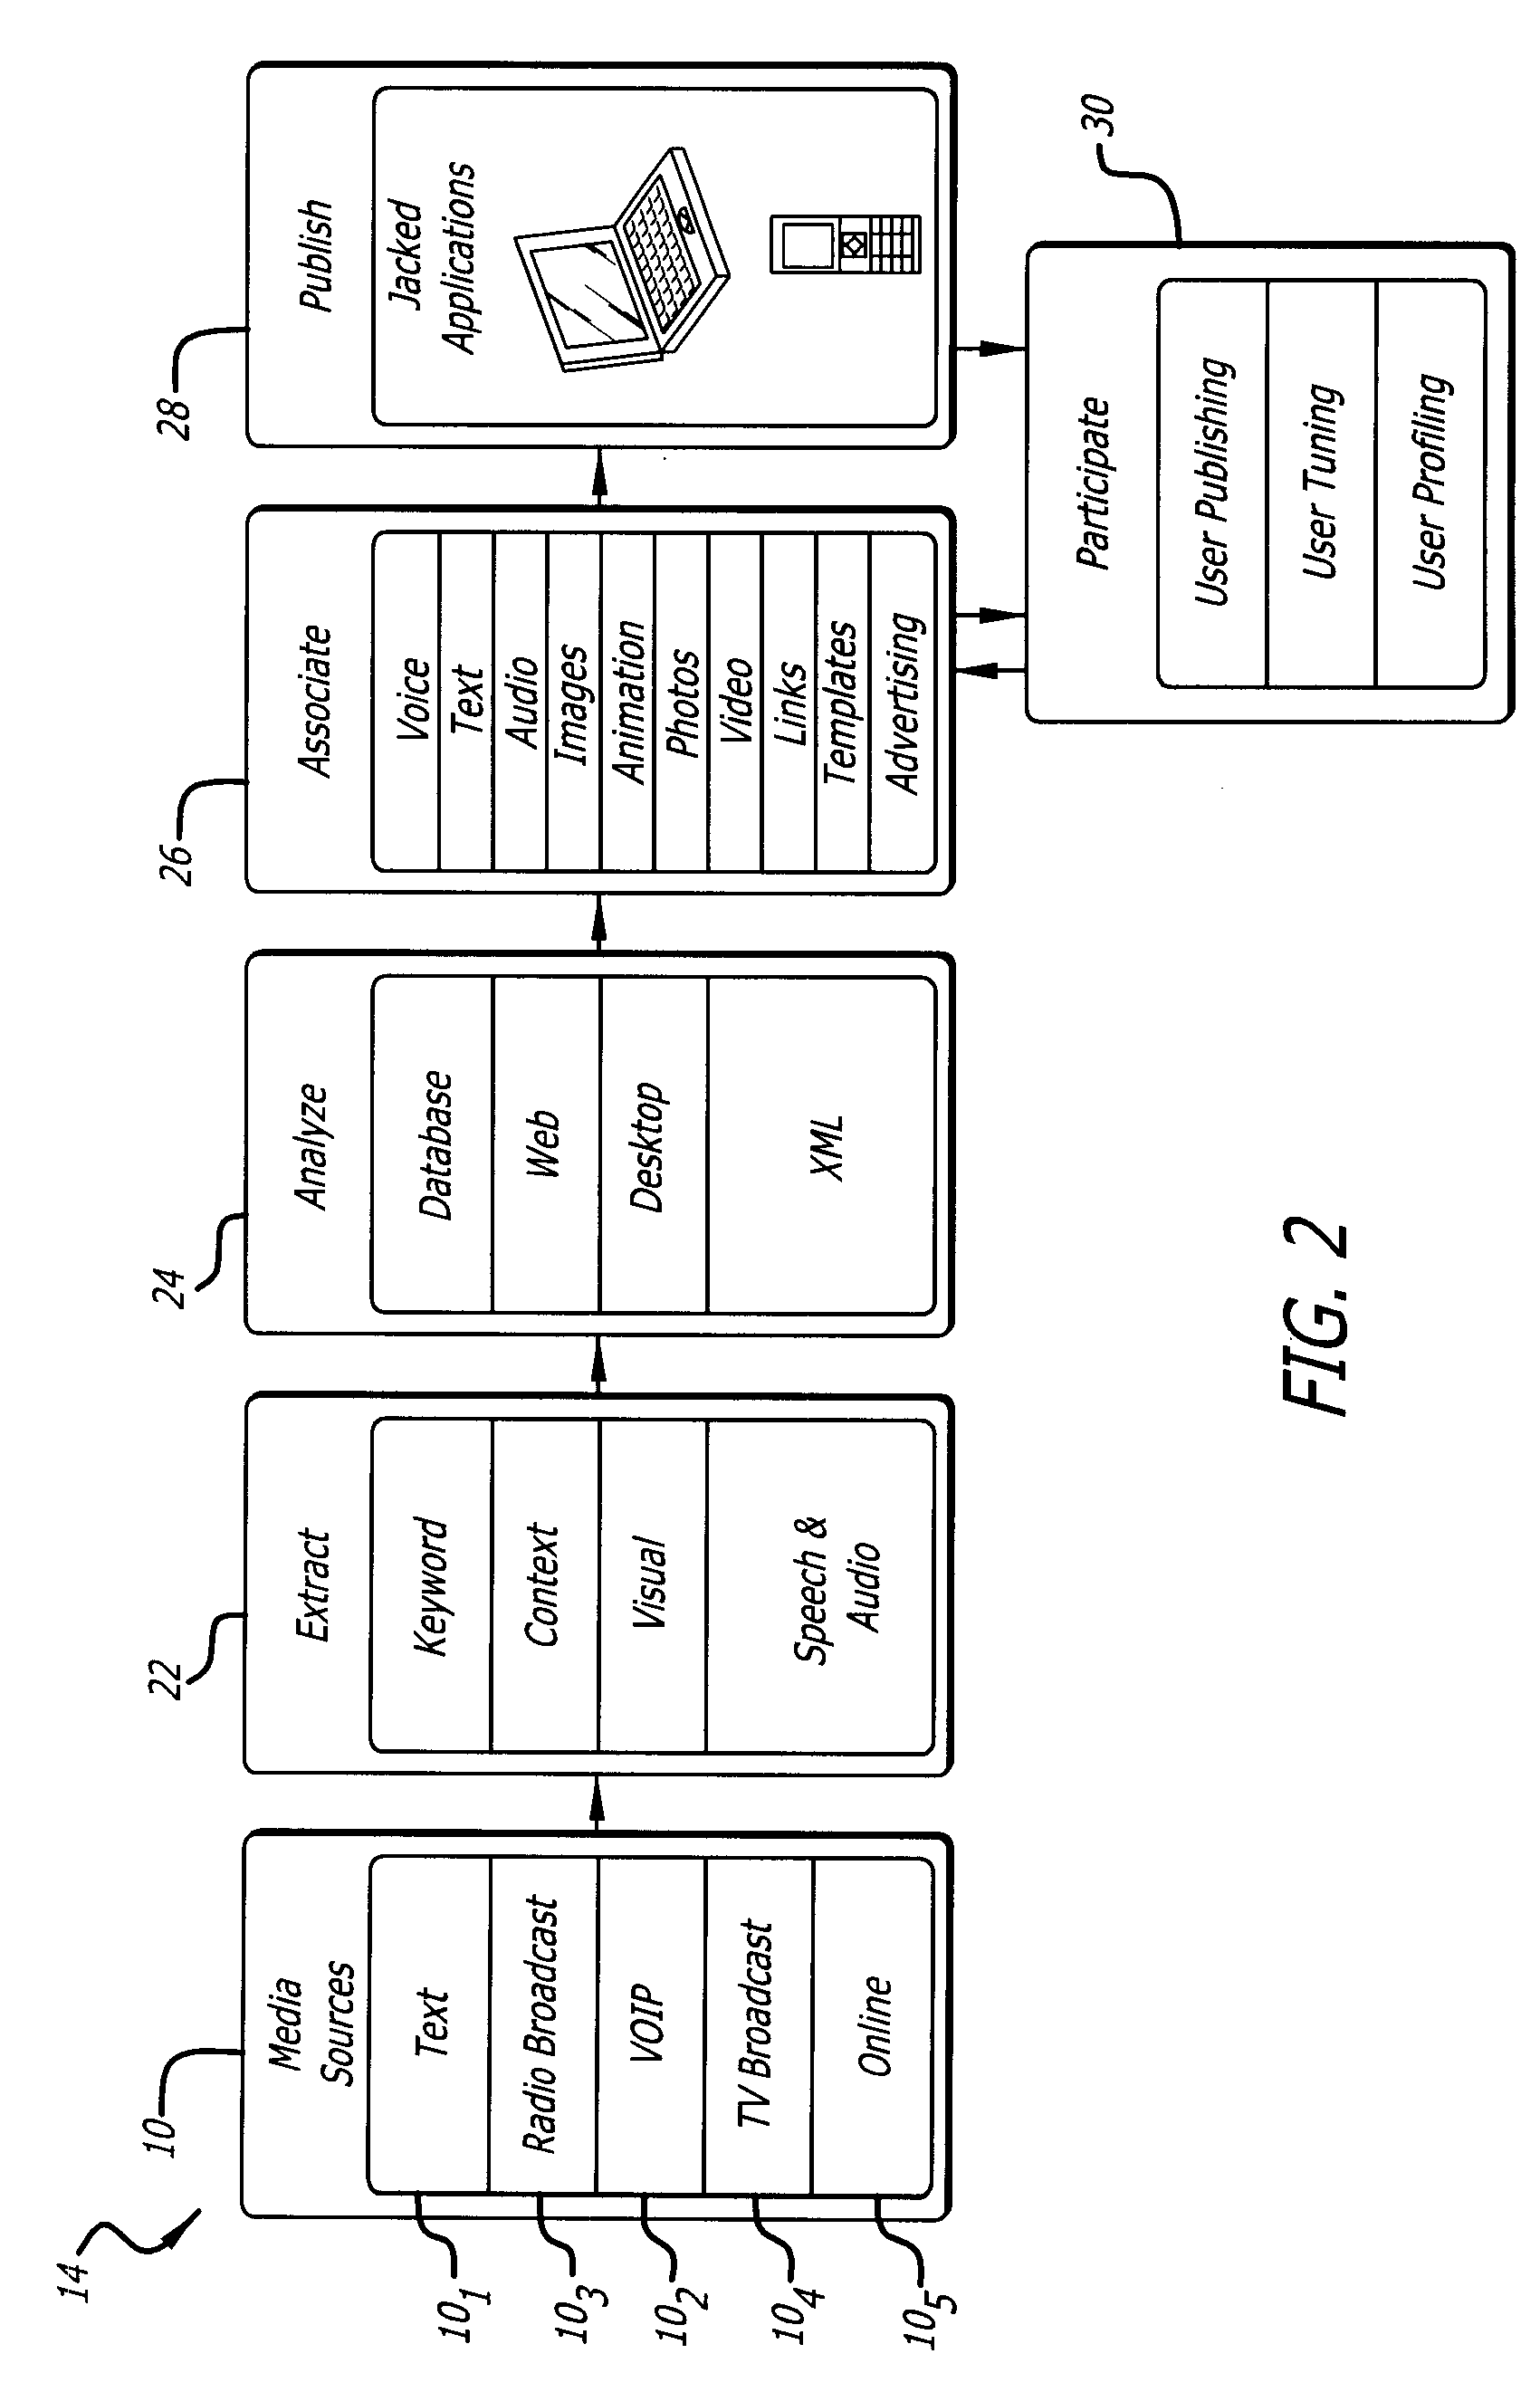 System for providing promotional content as part of secondary content associated with a primary broadcast